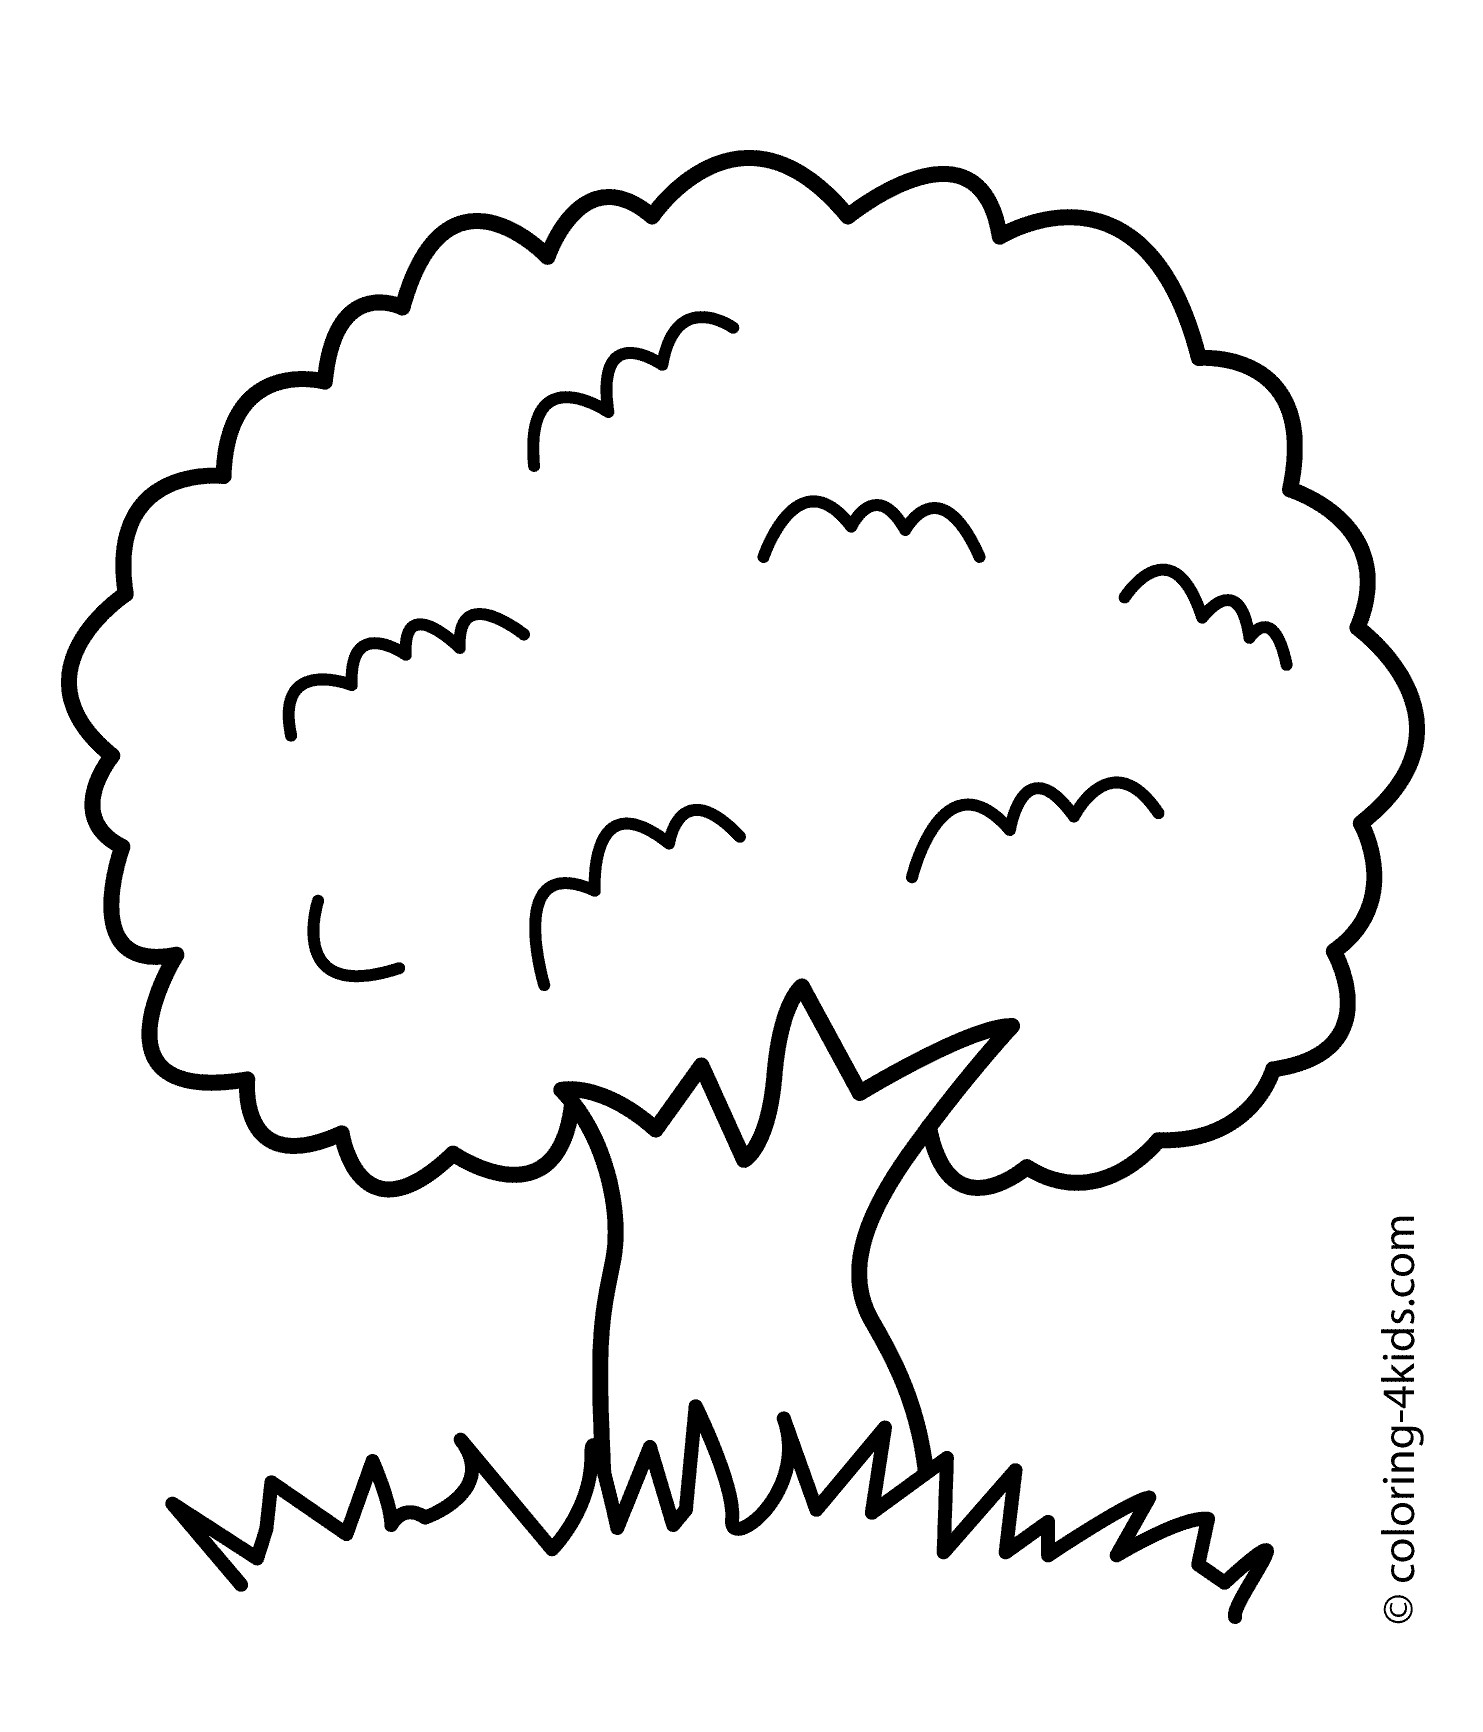 25 Of the Best Ideas for Tree Coloring Pages for Kids - Home, Family ...